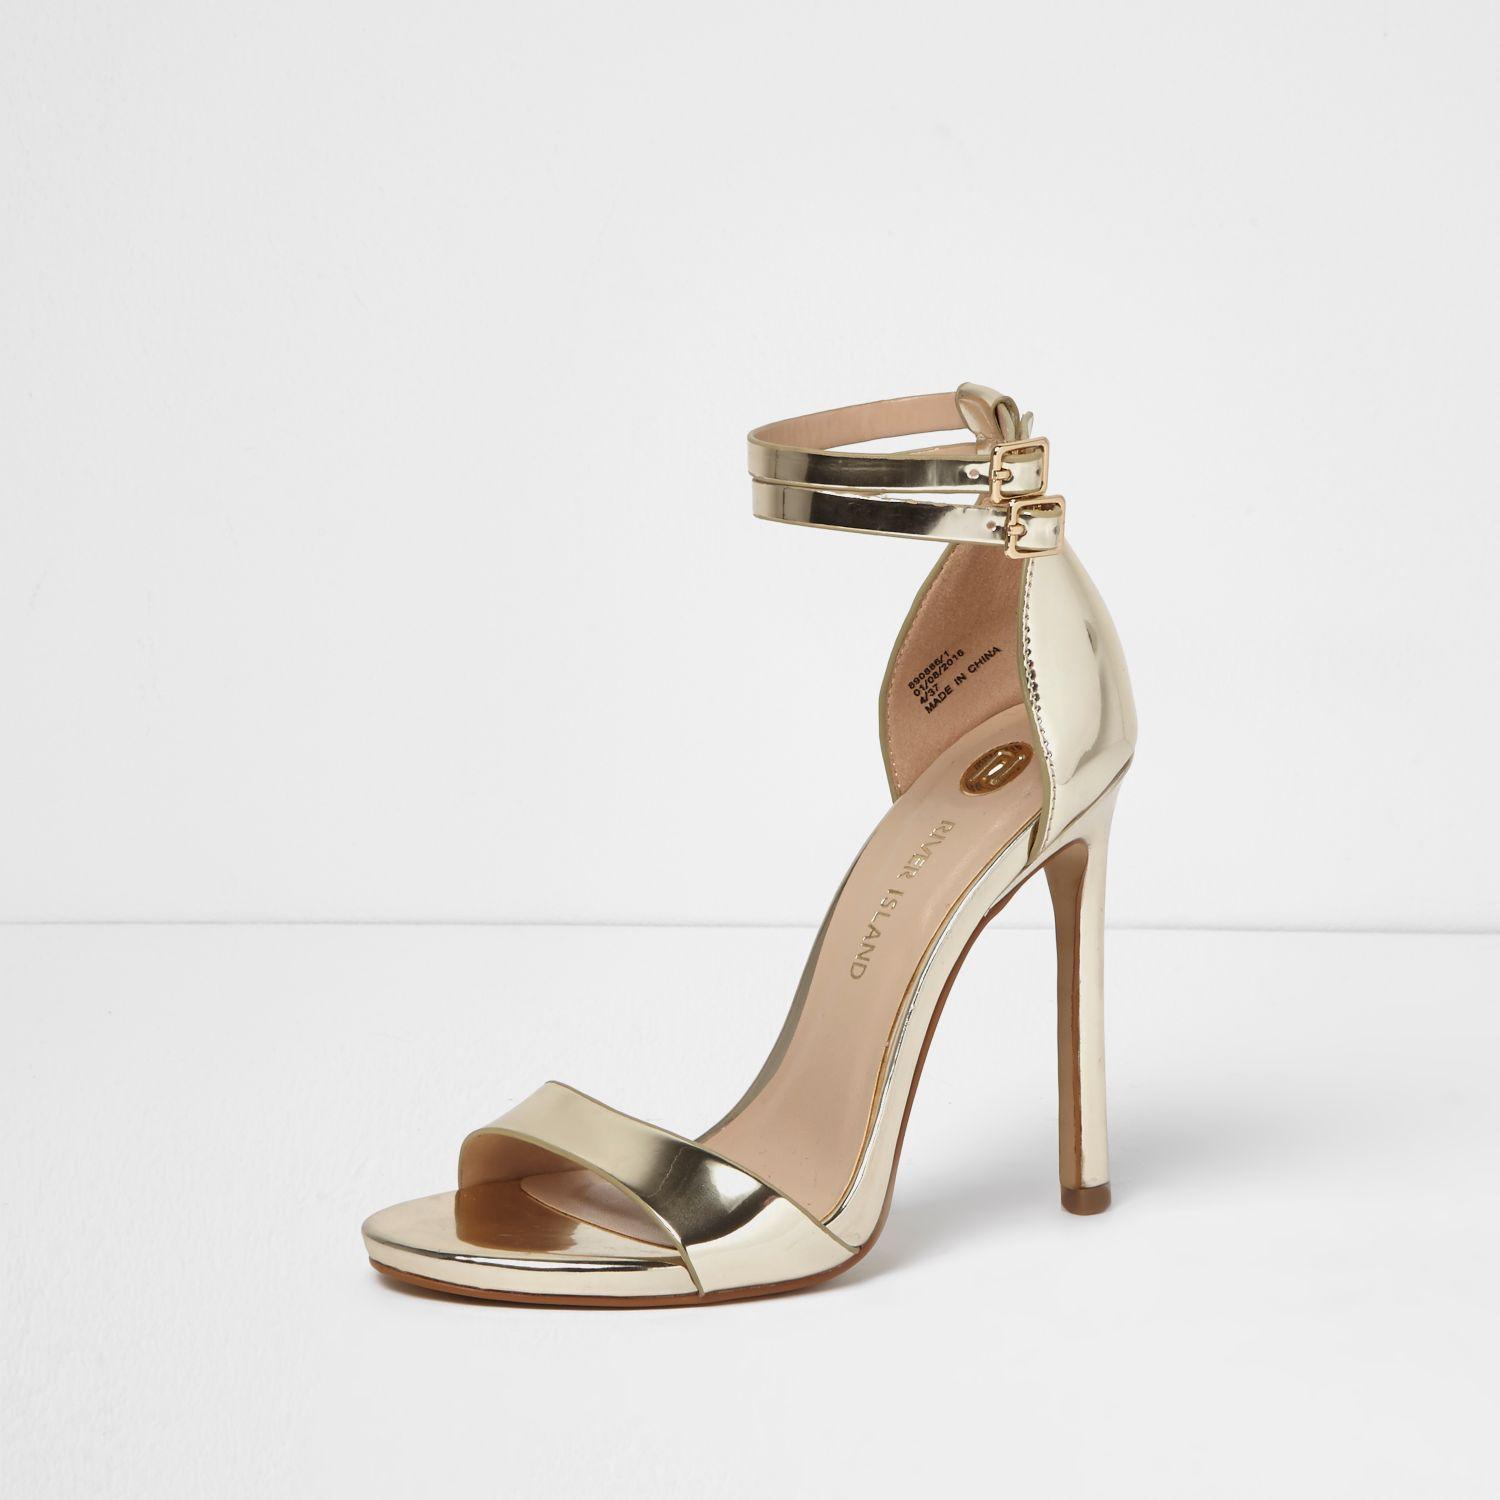 River Island Gold Strappy Barely There Heels in Metallic - Lyst